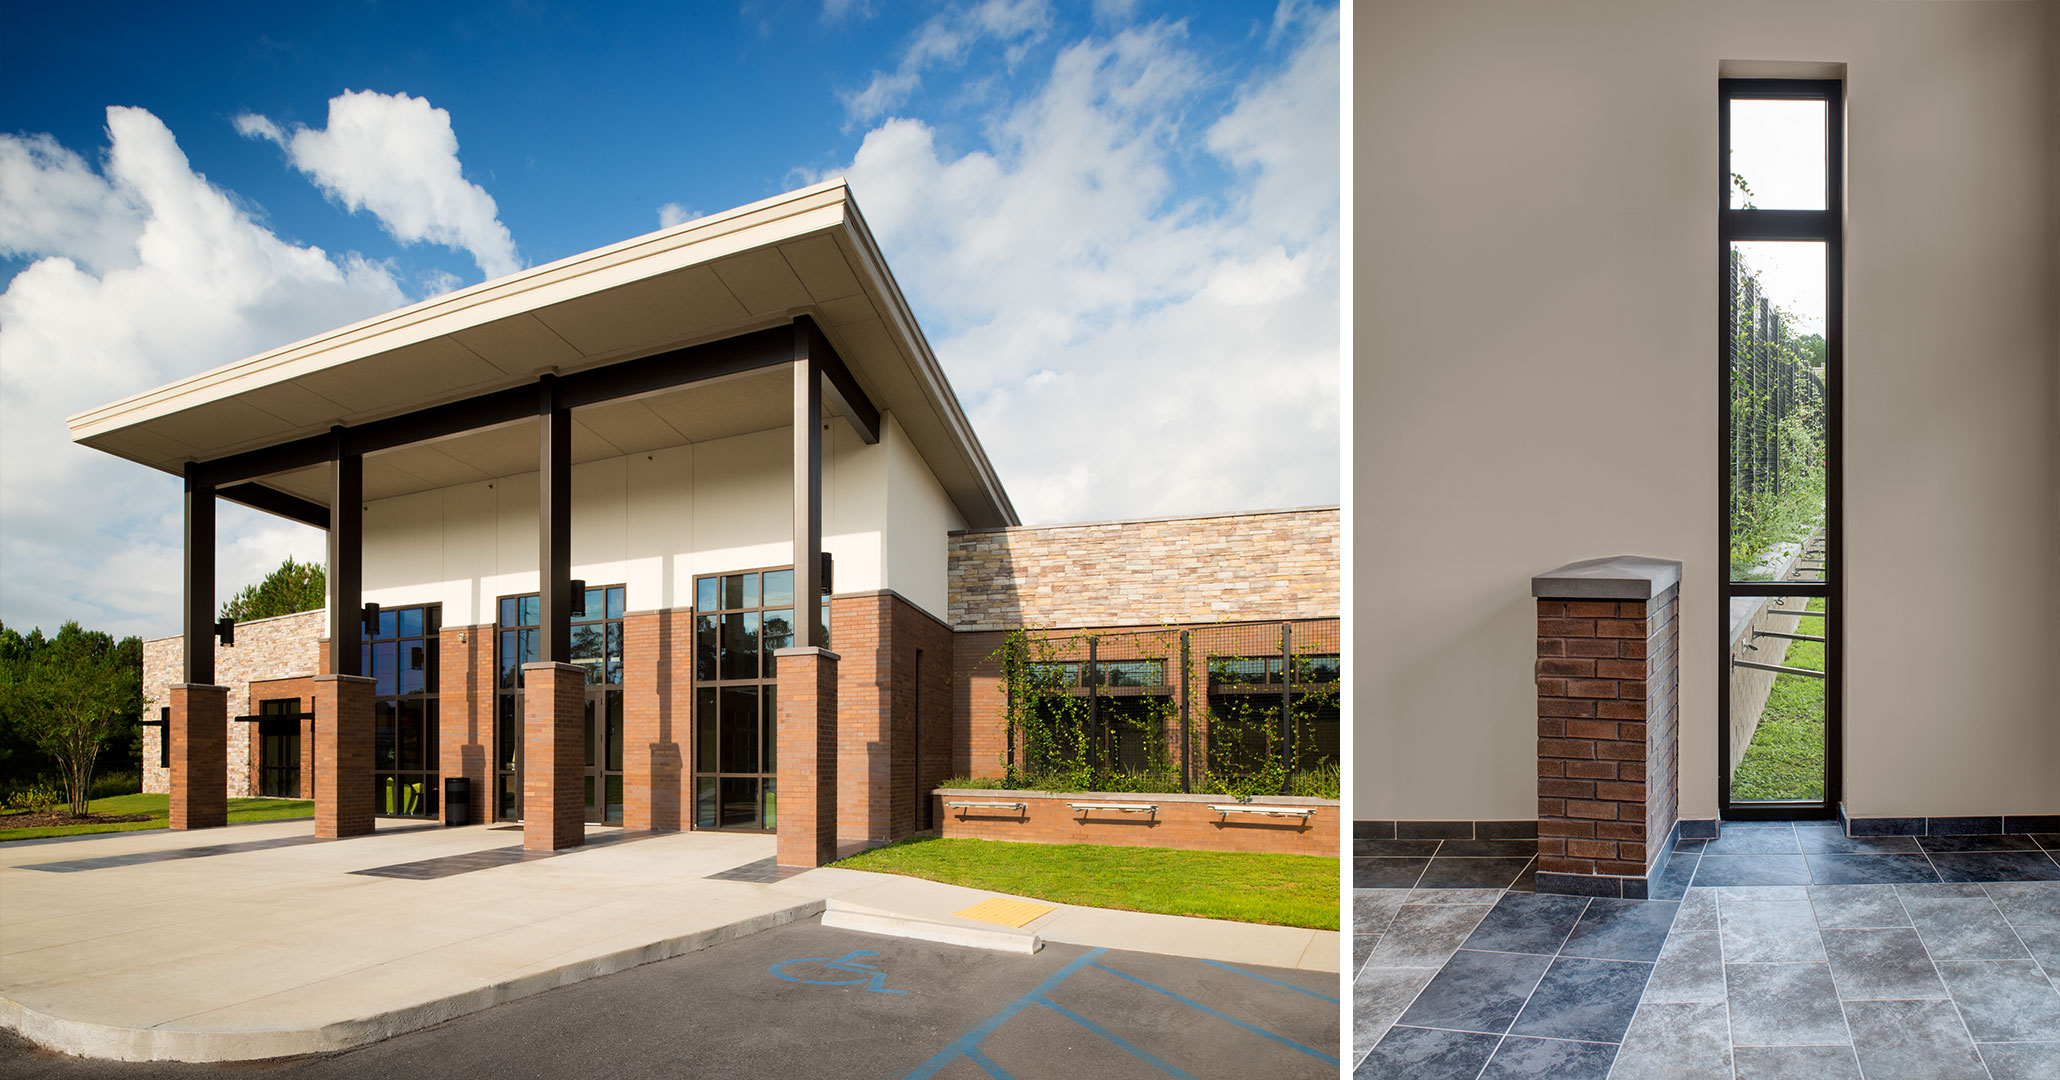 Boudreaux architects worked with the Richland County Recreation Commission to design the interiors and make the exterior look more modern at the RCRC Headquarters.